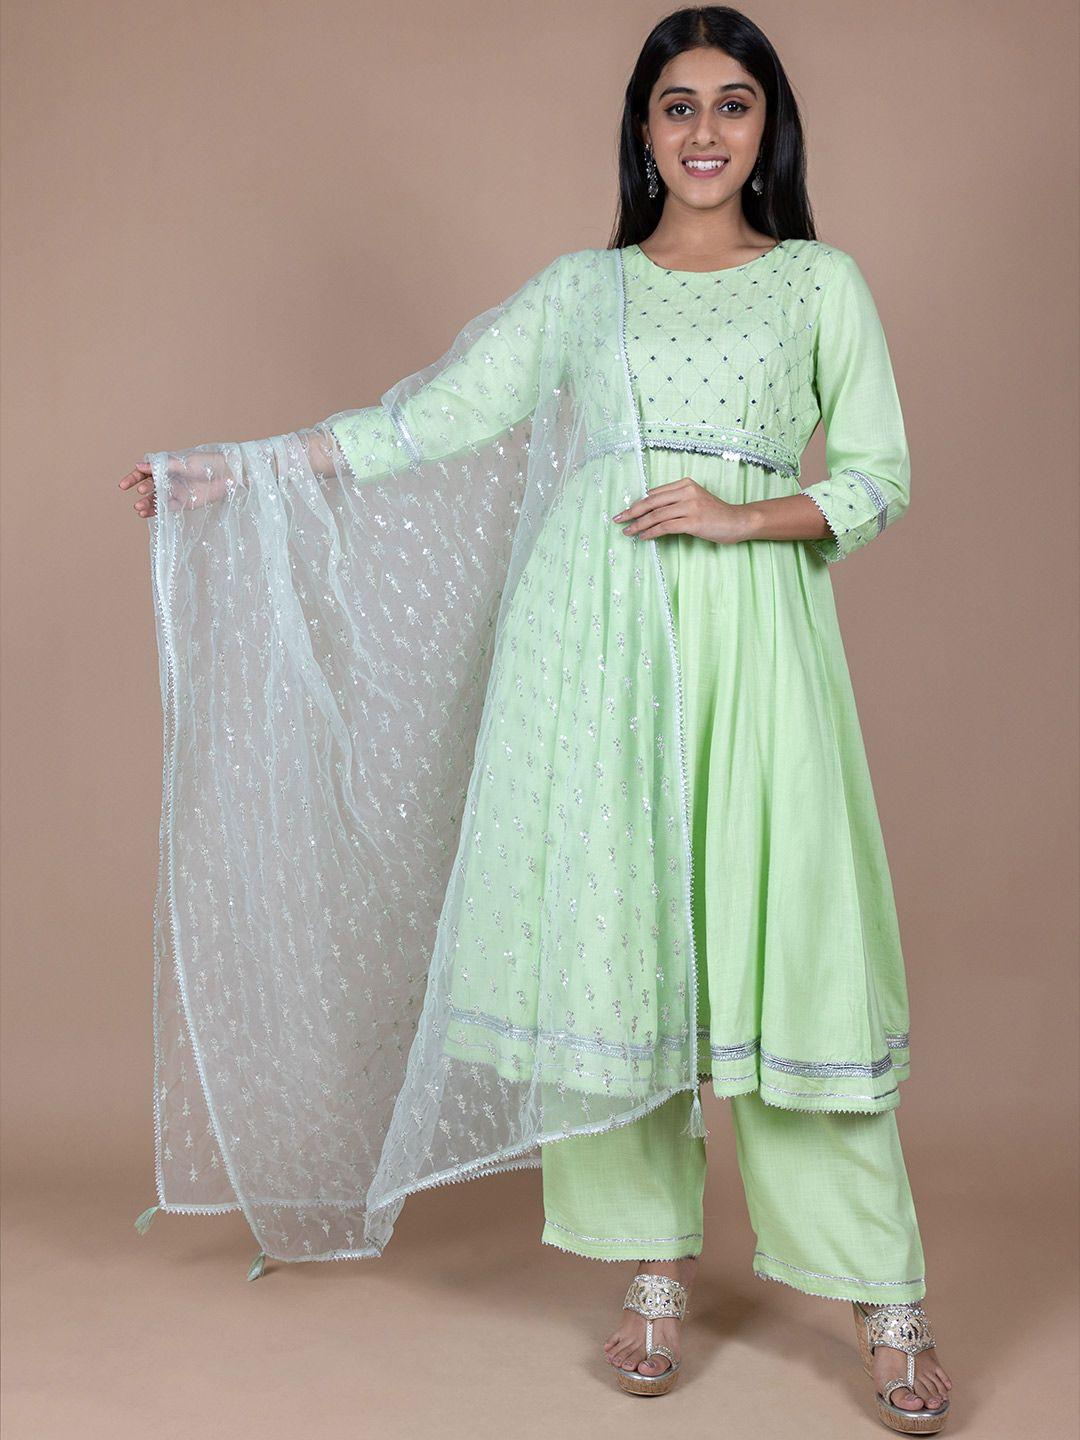 here&now green & silver-toned ethnic motifs embroidered dupatta